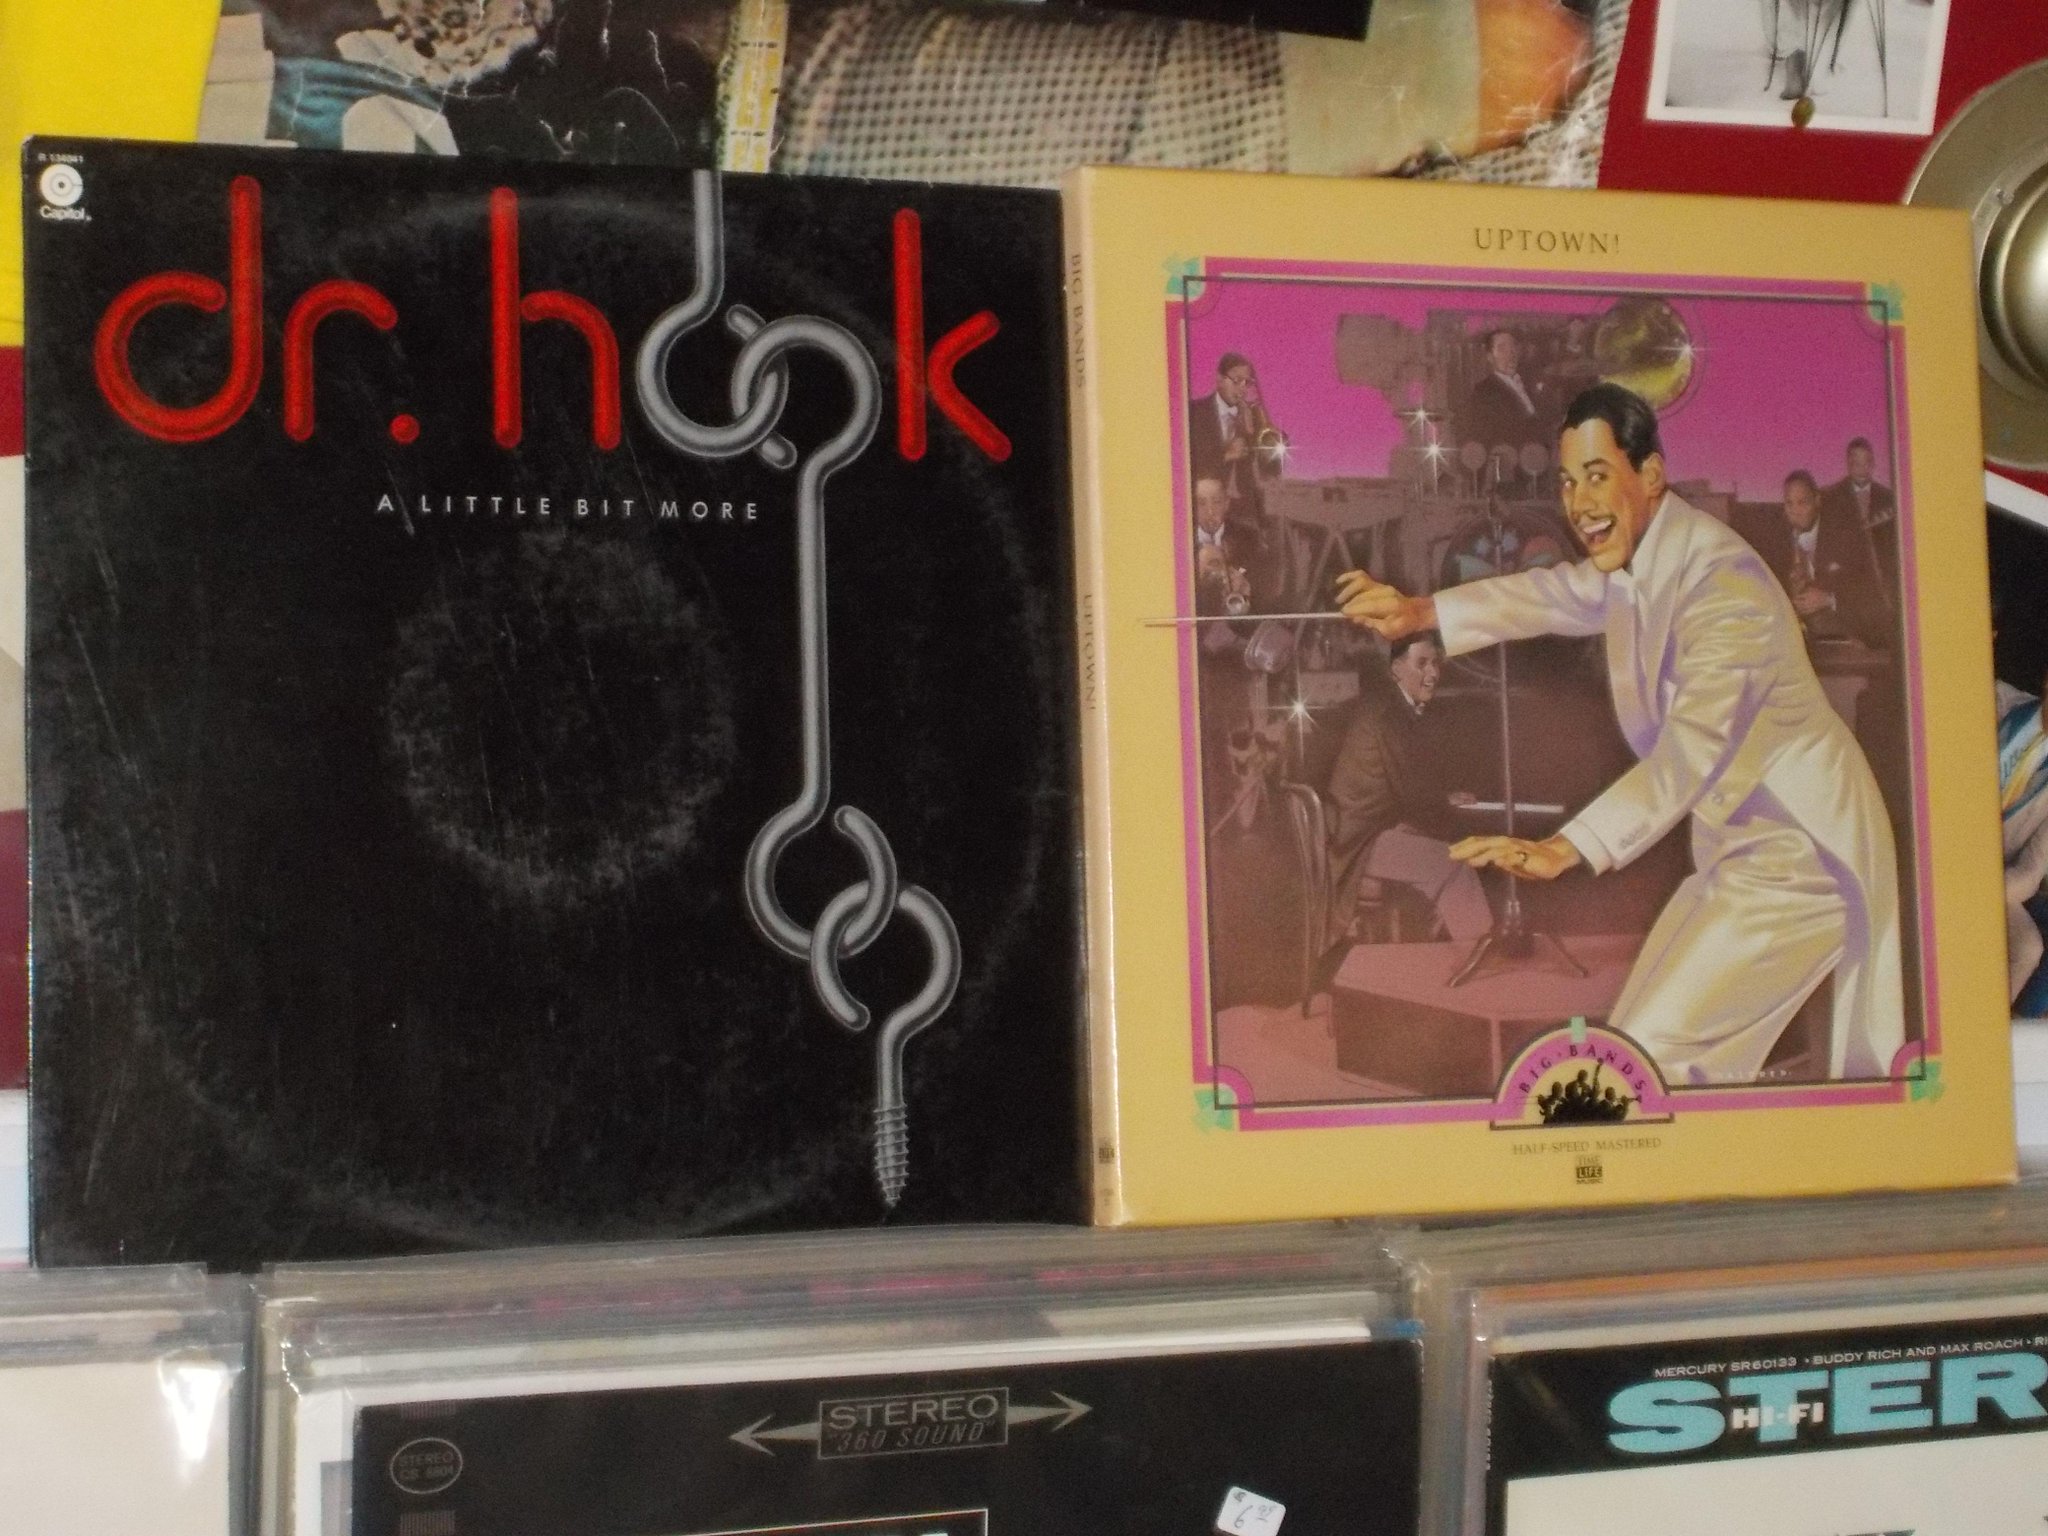 Happy Birthday to Dennis Locorriere of Dr. Hook and the late Doc Cheatam, who played with Cab Callaway (and his own) 